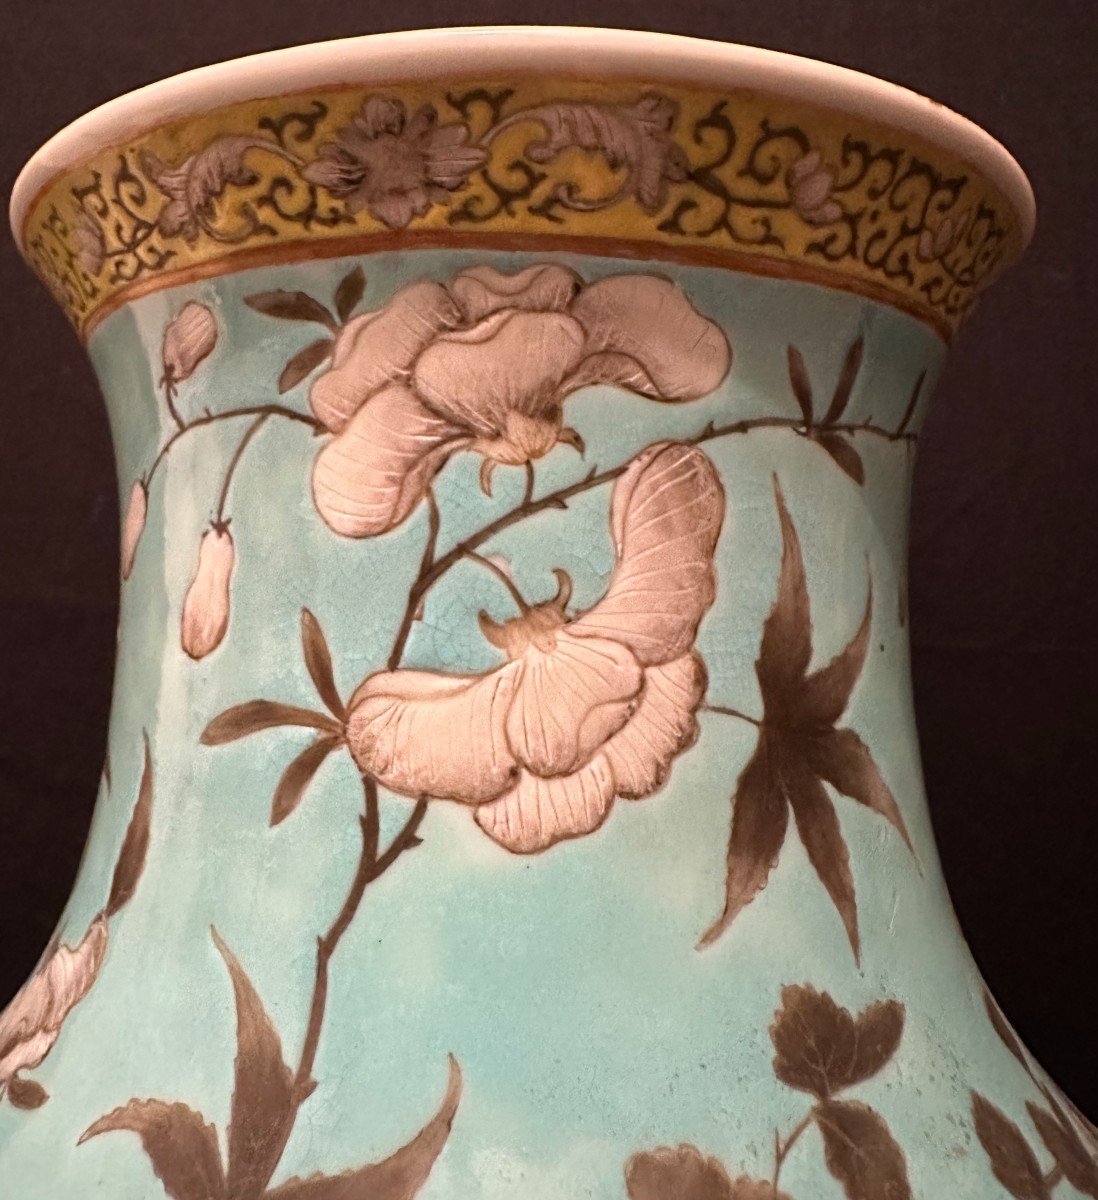 China Porcelain Vase Dayazhai Style With Dragons Guangxu Period Late 19th Century-photo-6